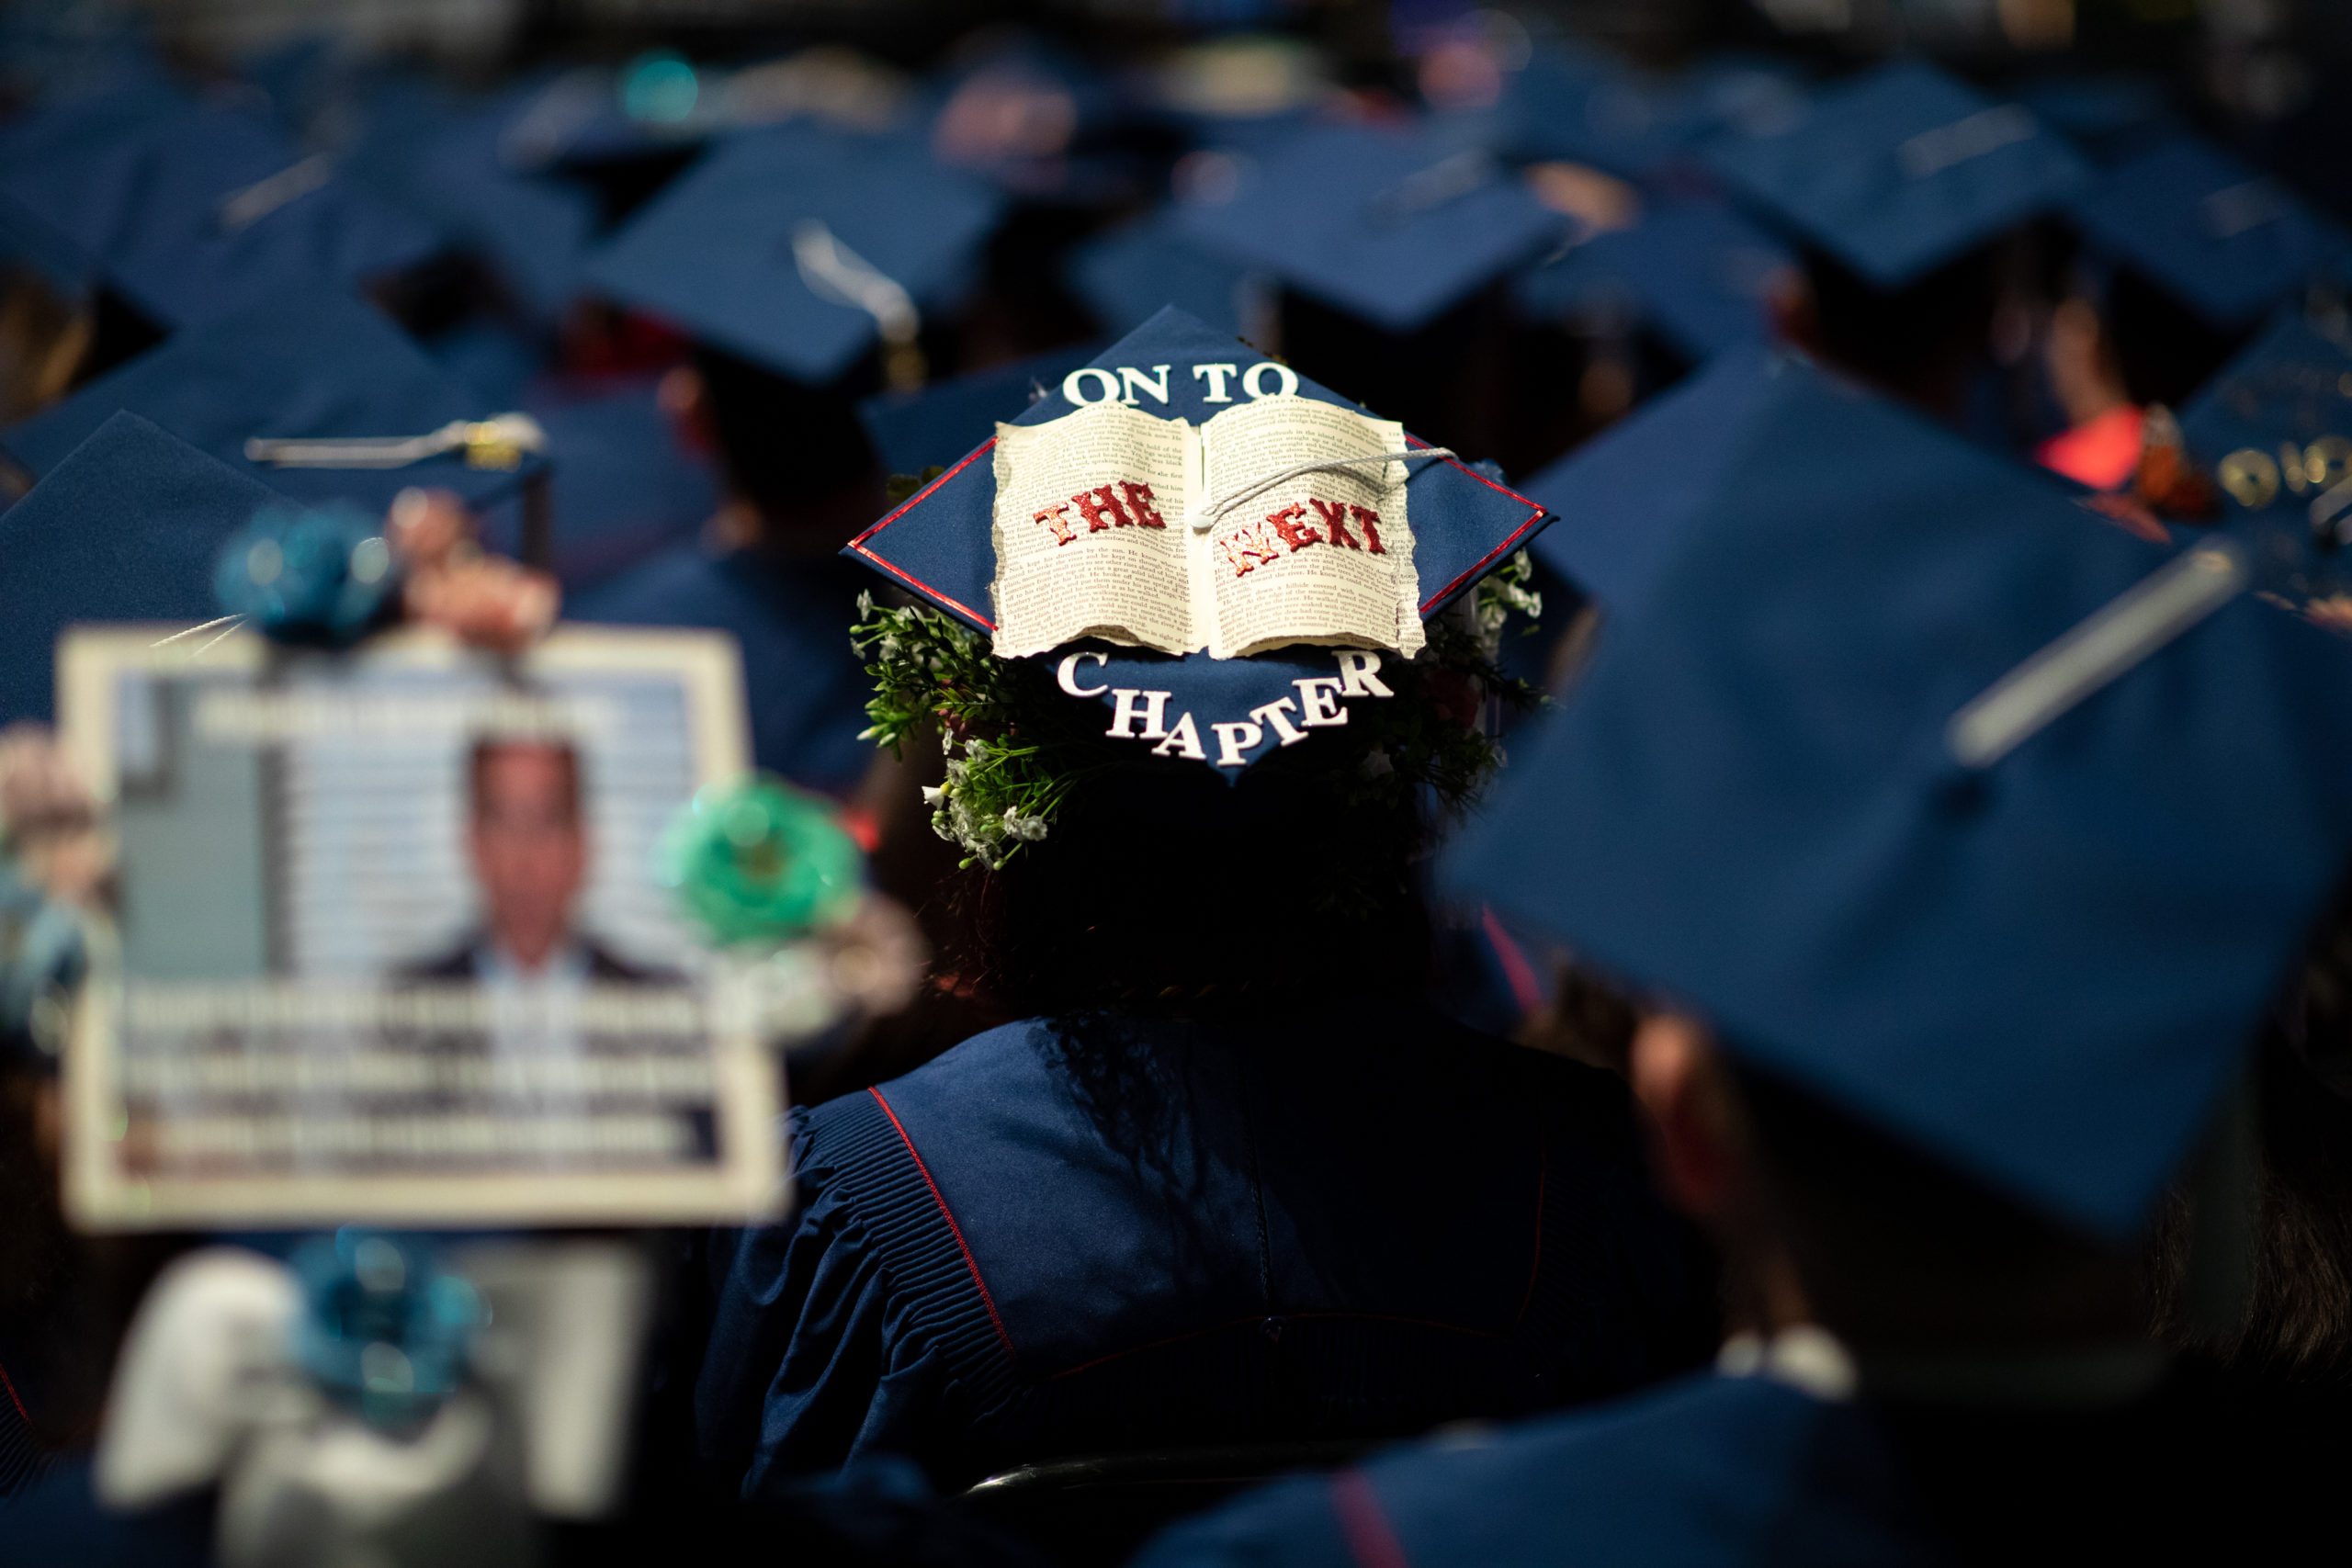 Spring 2019 Commencement Ceremony